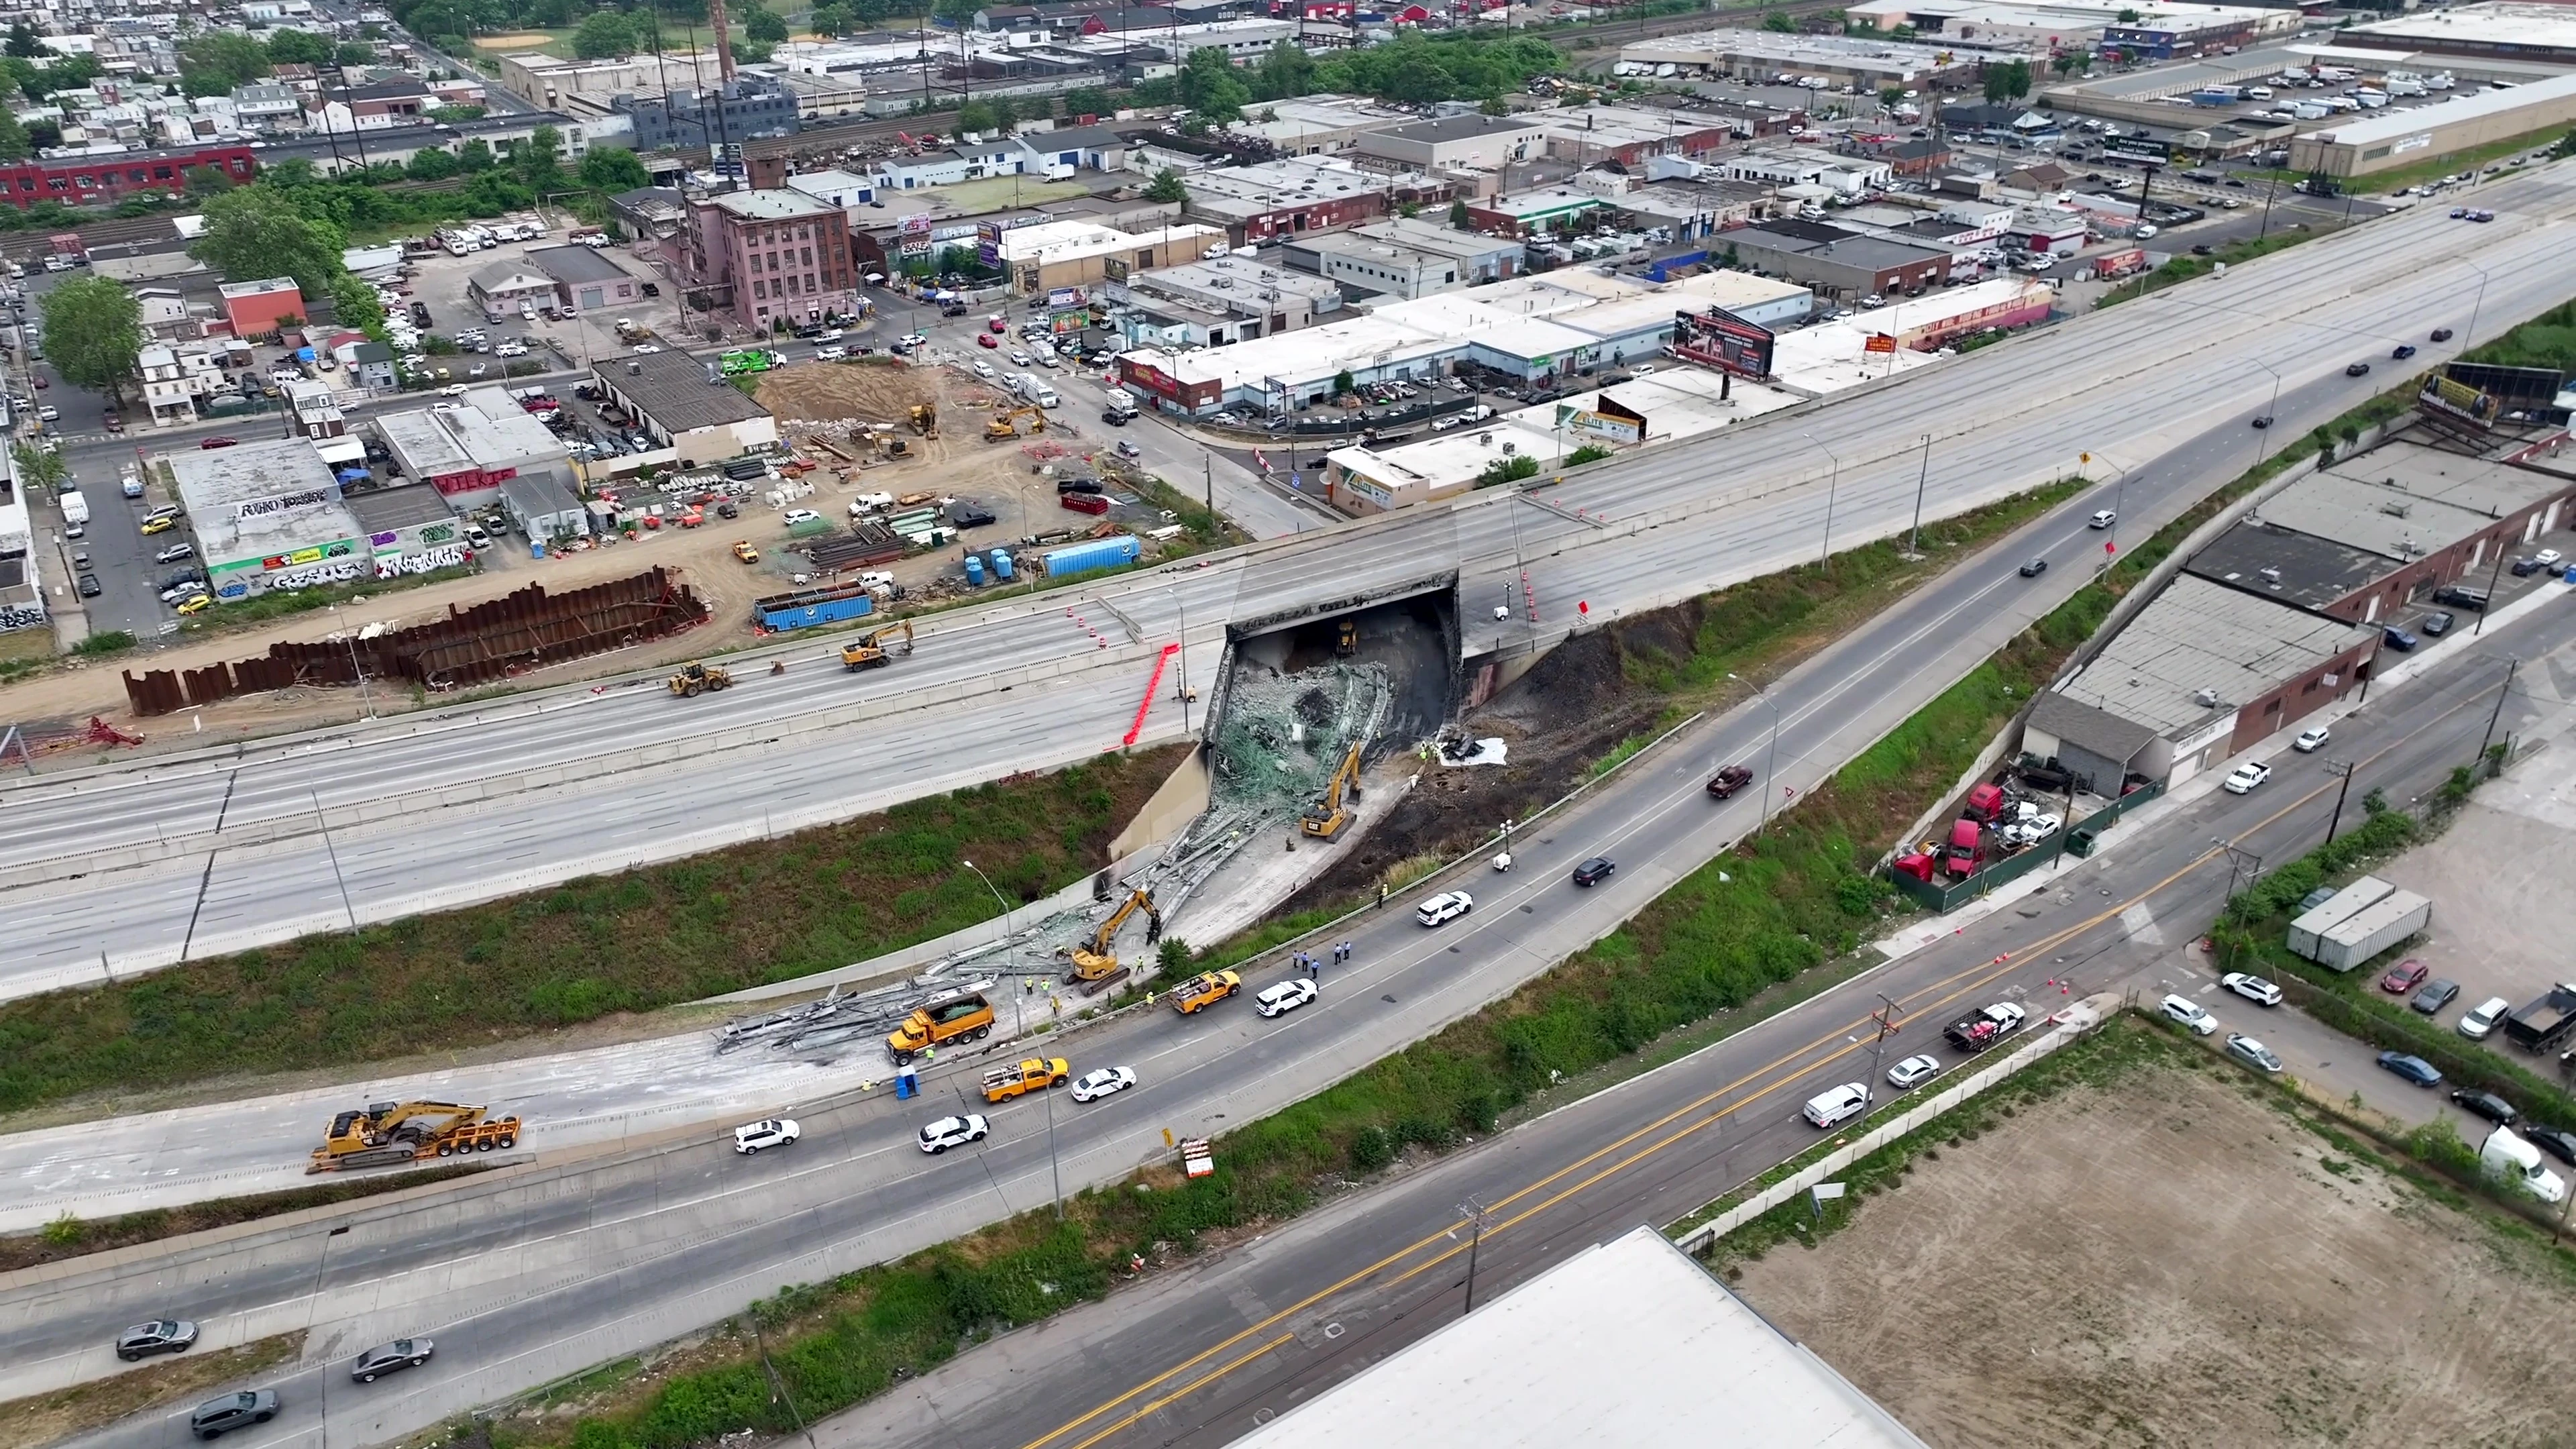 An aerial image of the collapsed section of I-95 with large pieces of construction equipment working to remove debris from the site